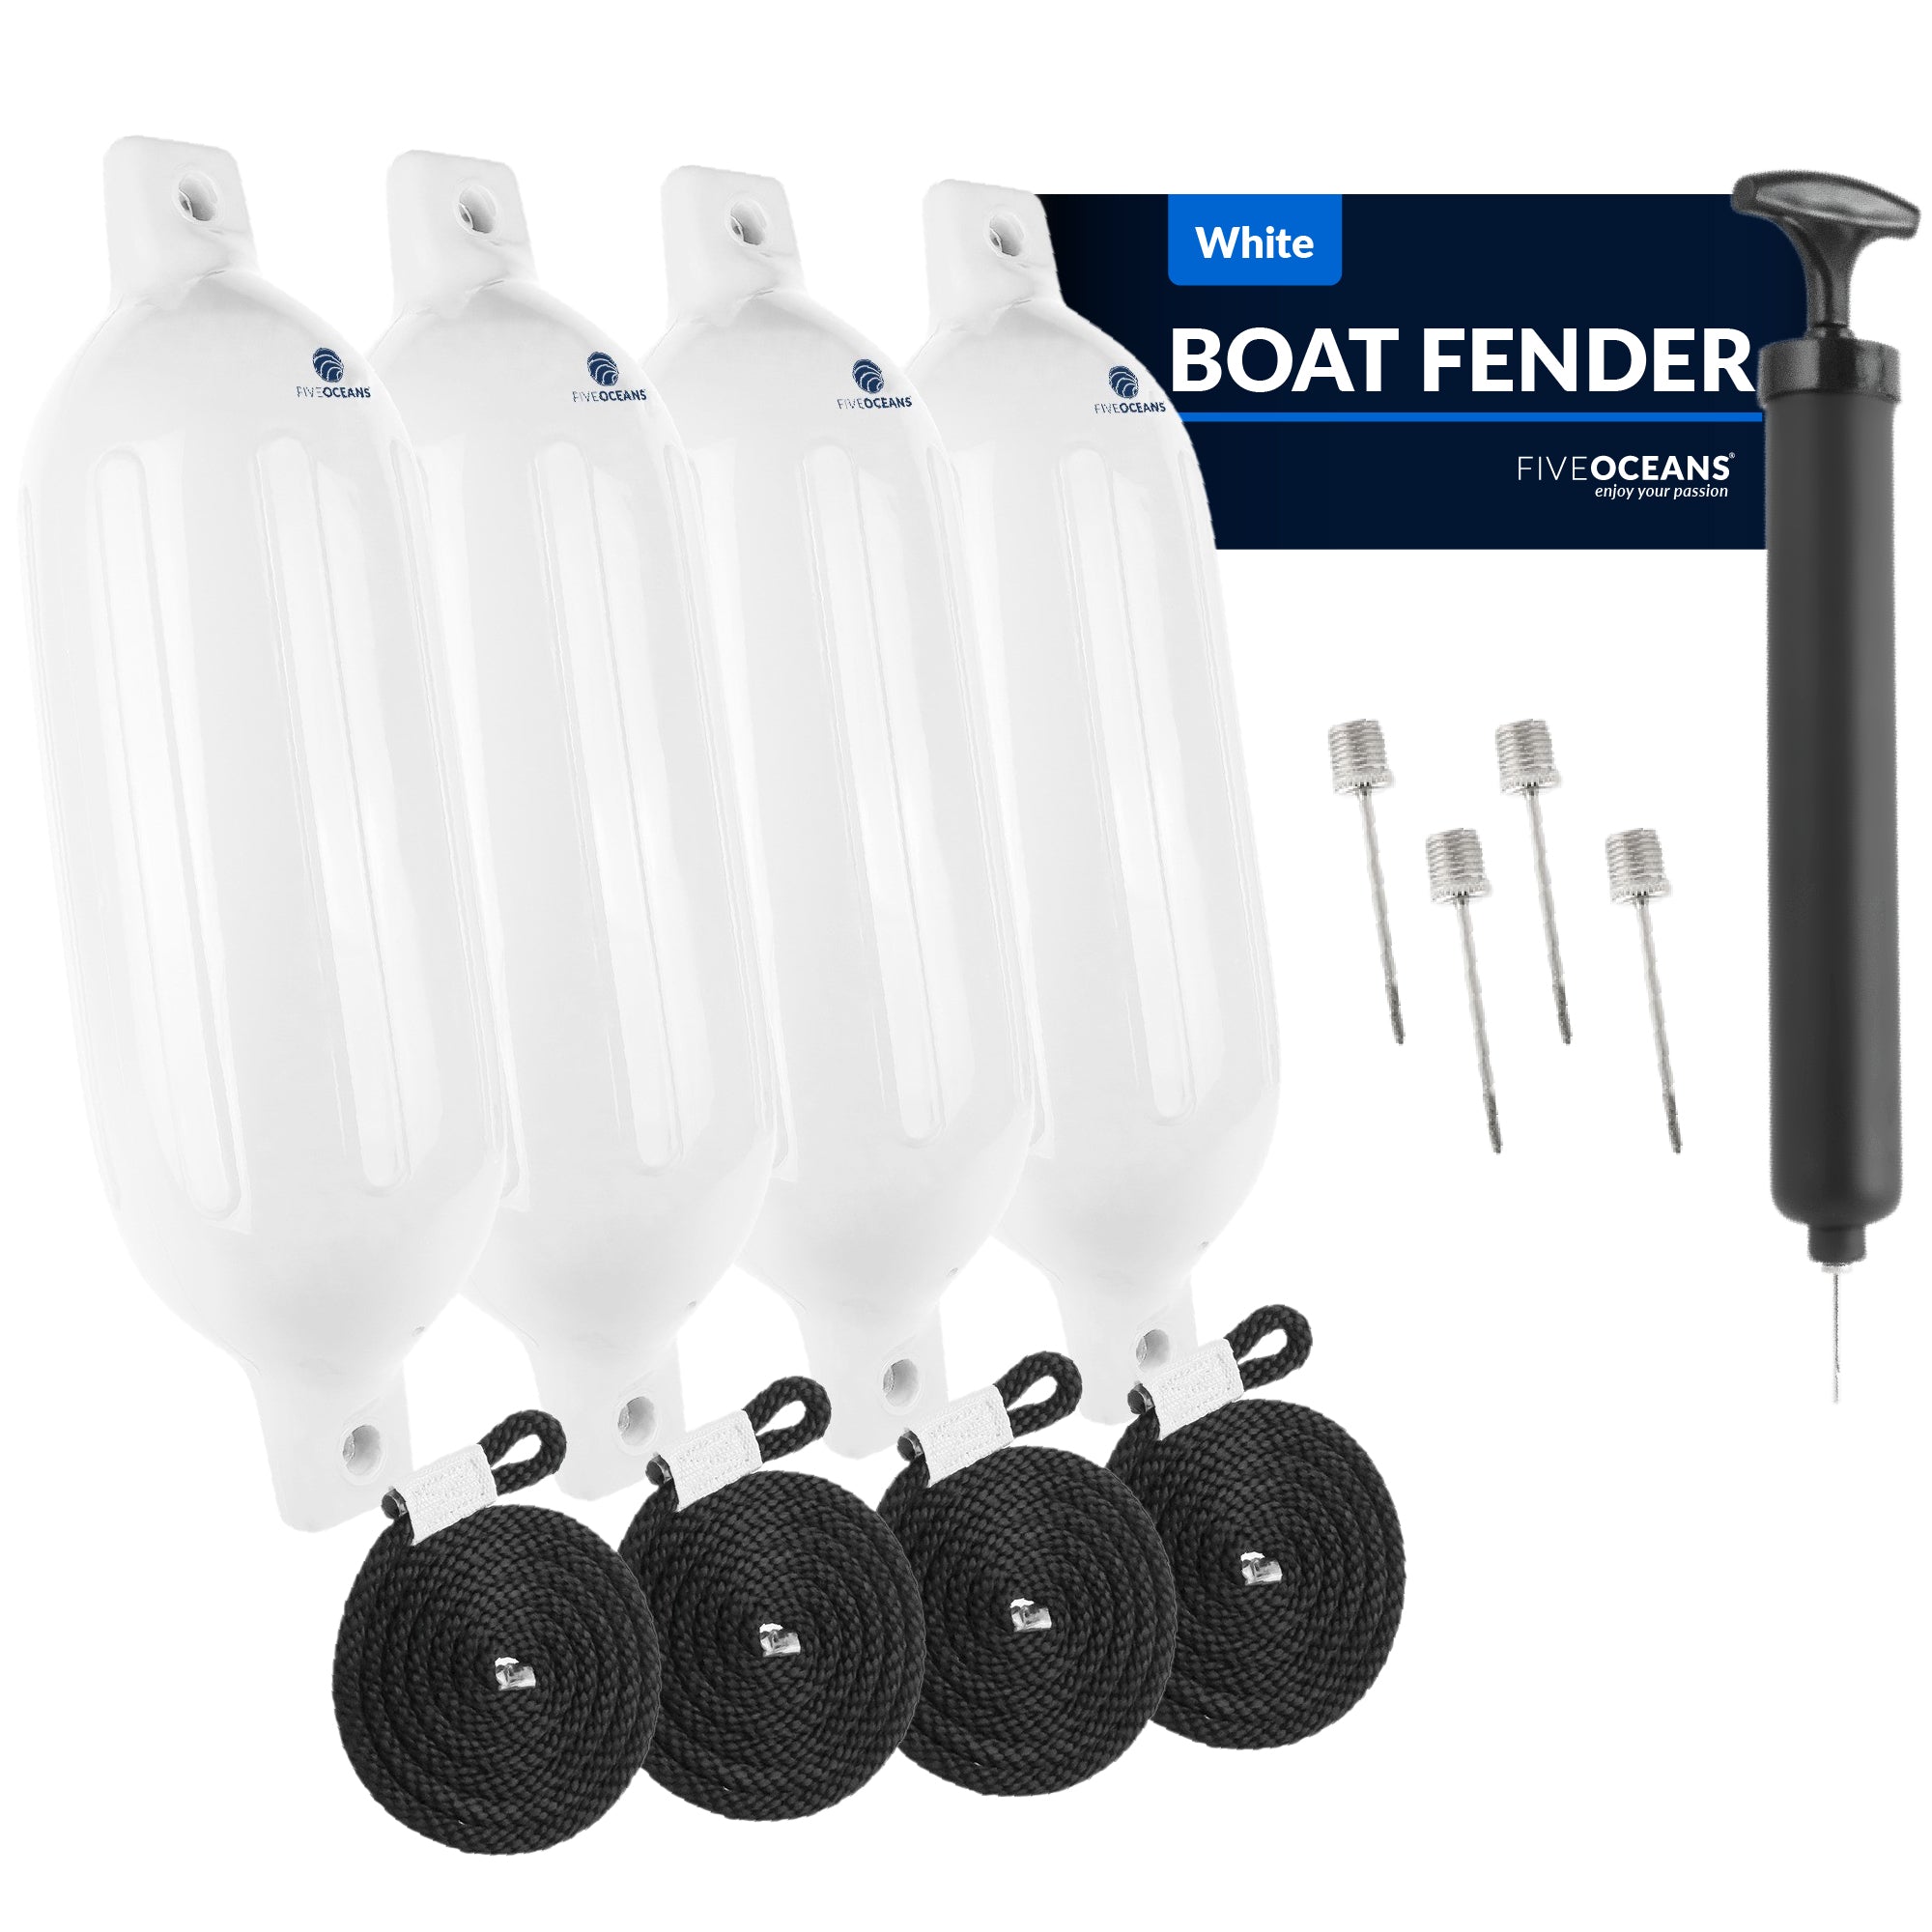 white boat fenders boat bumpers for docking 4 pack